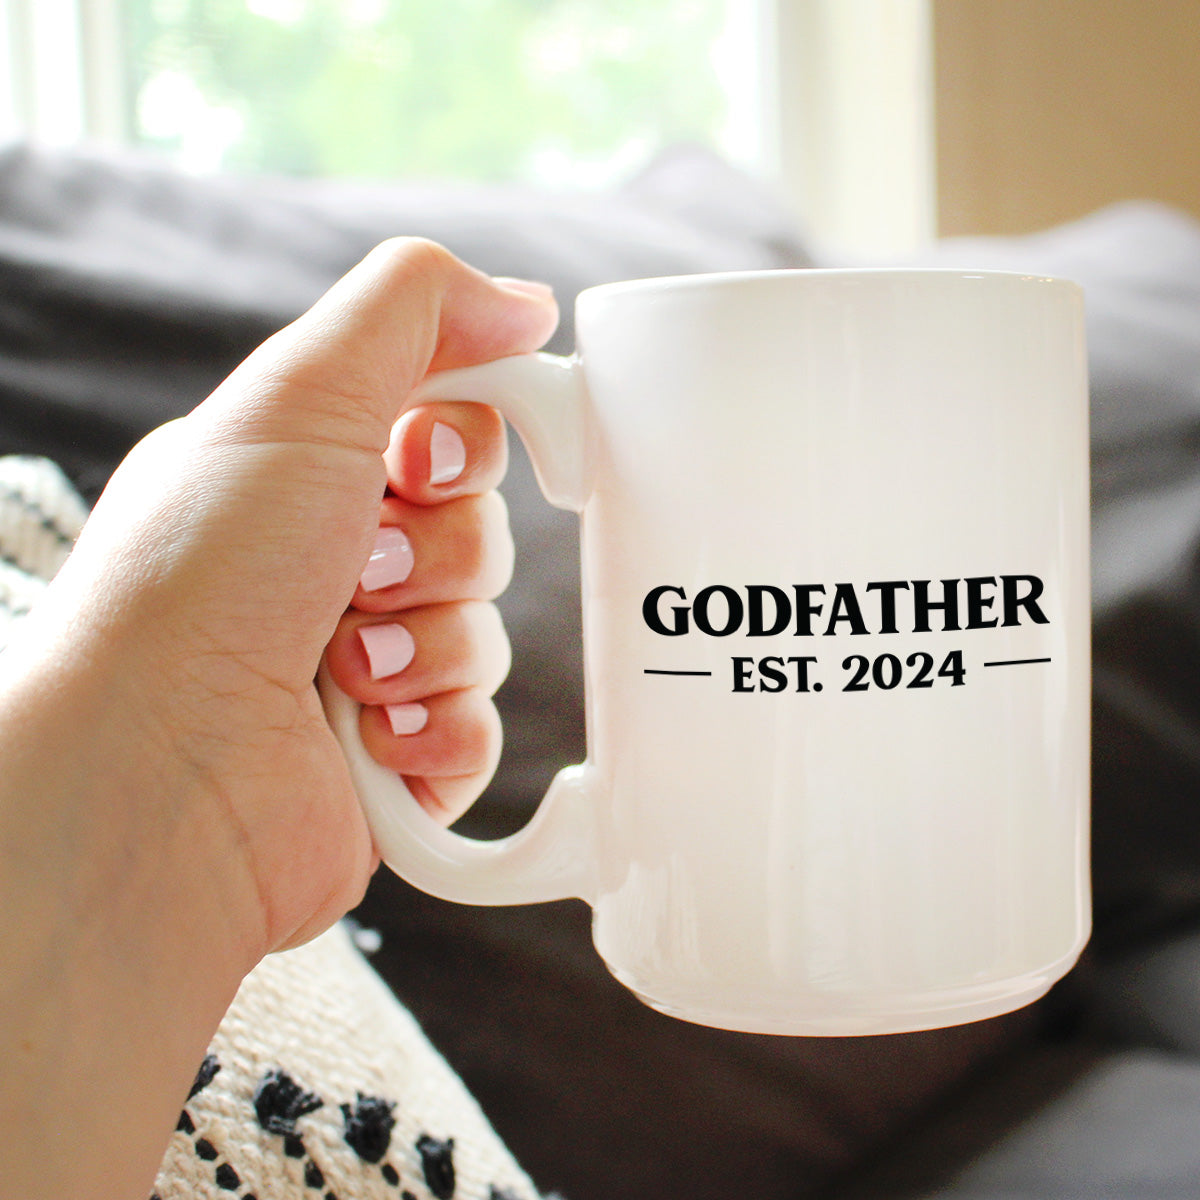 Godfather Est 2024 - New Godfather Coffee Mug Proposal Gift for First Time Godparents - Bold